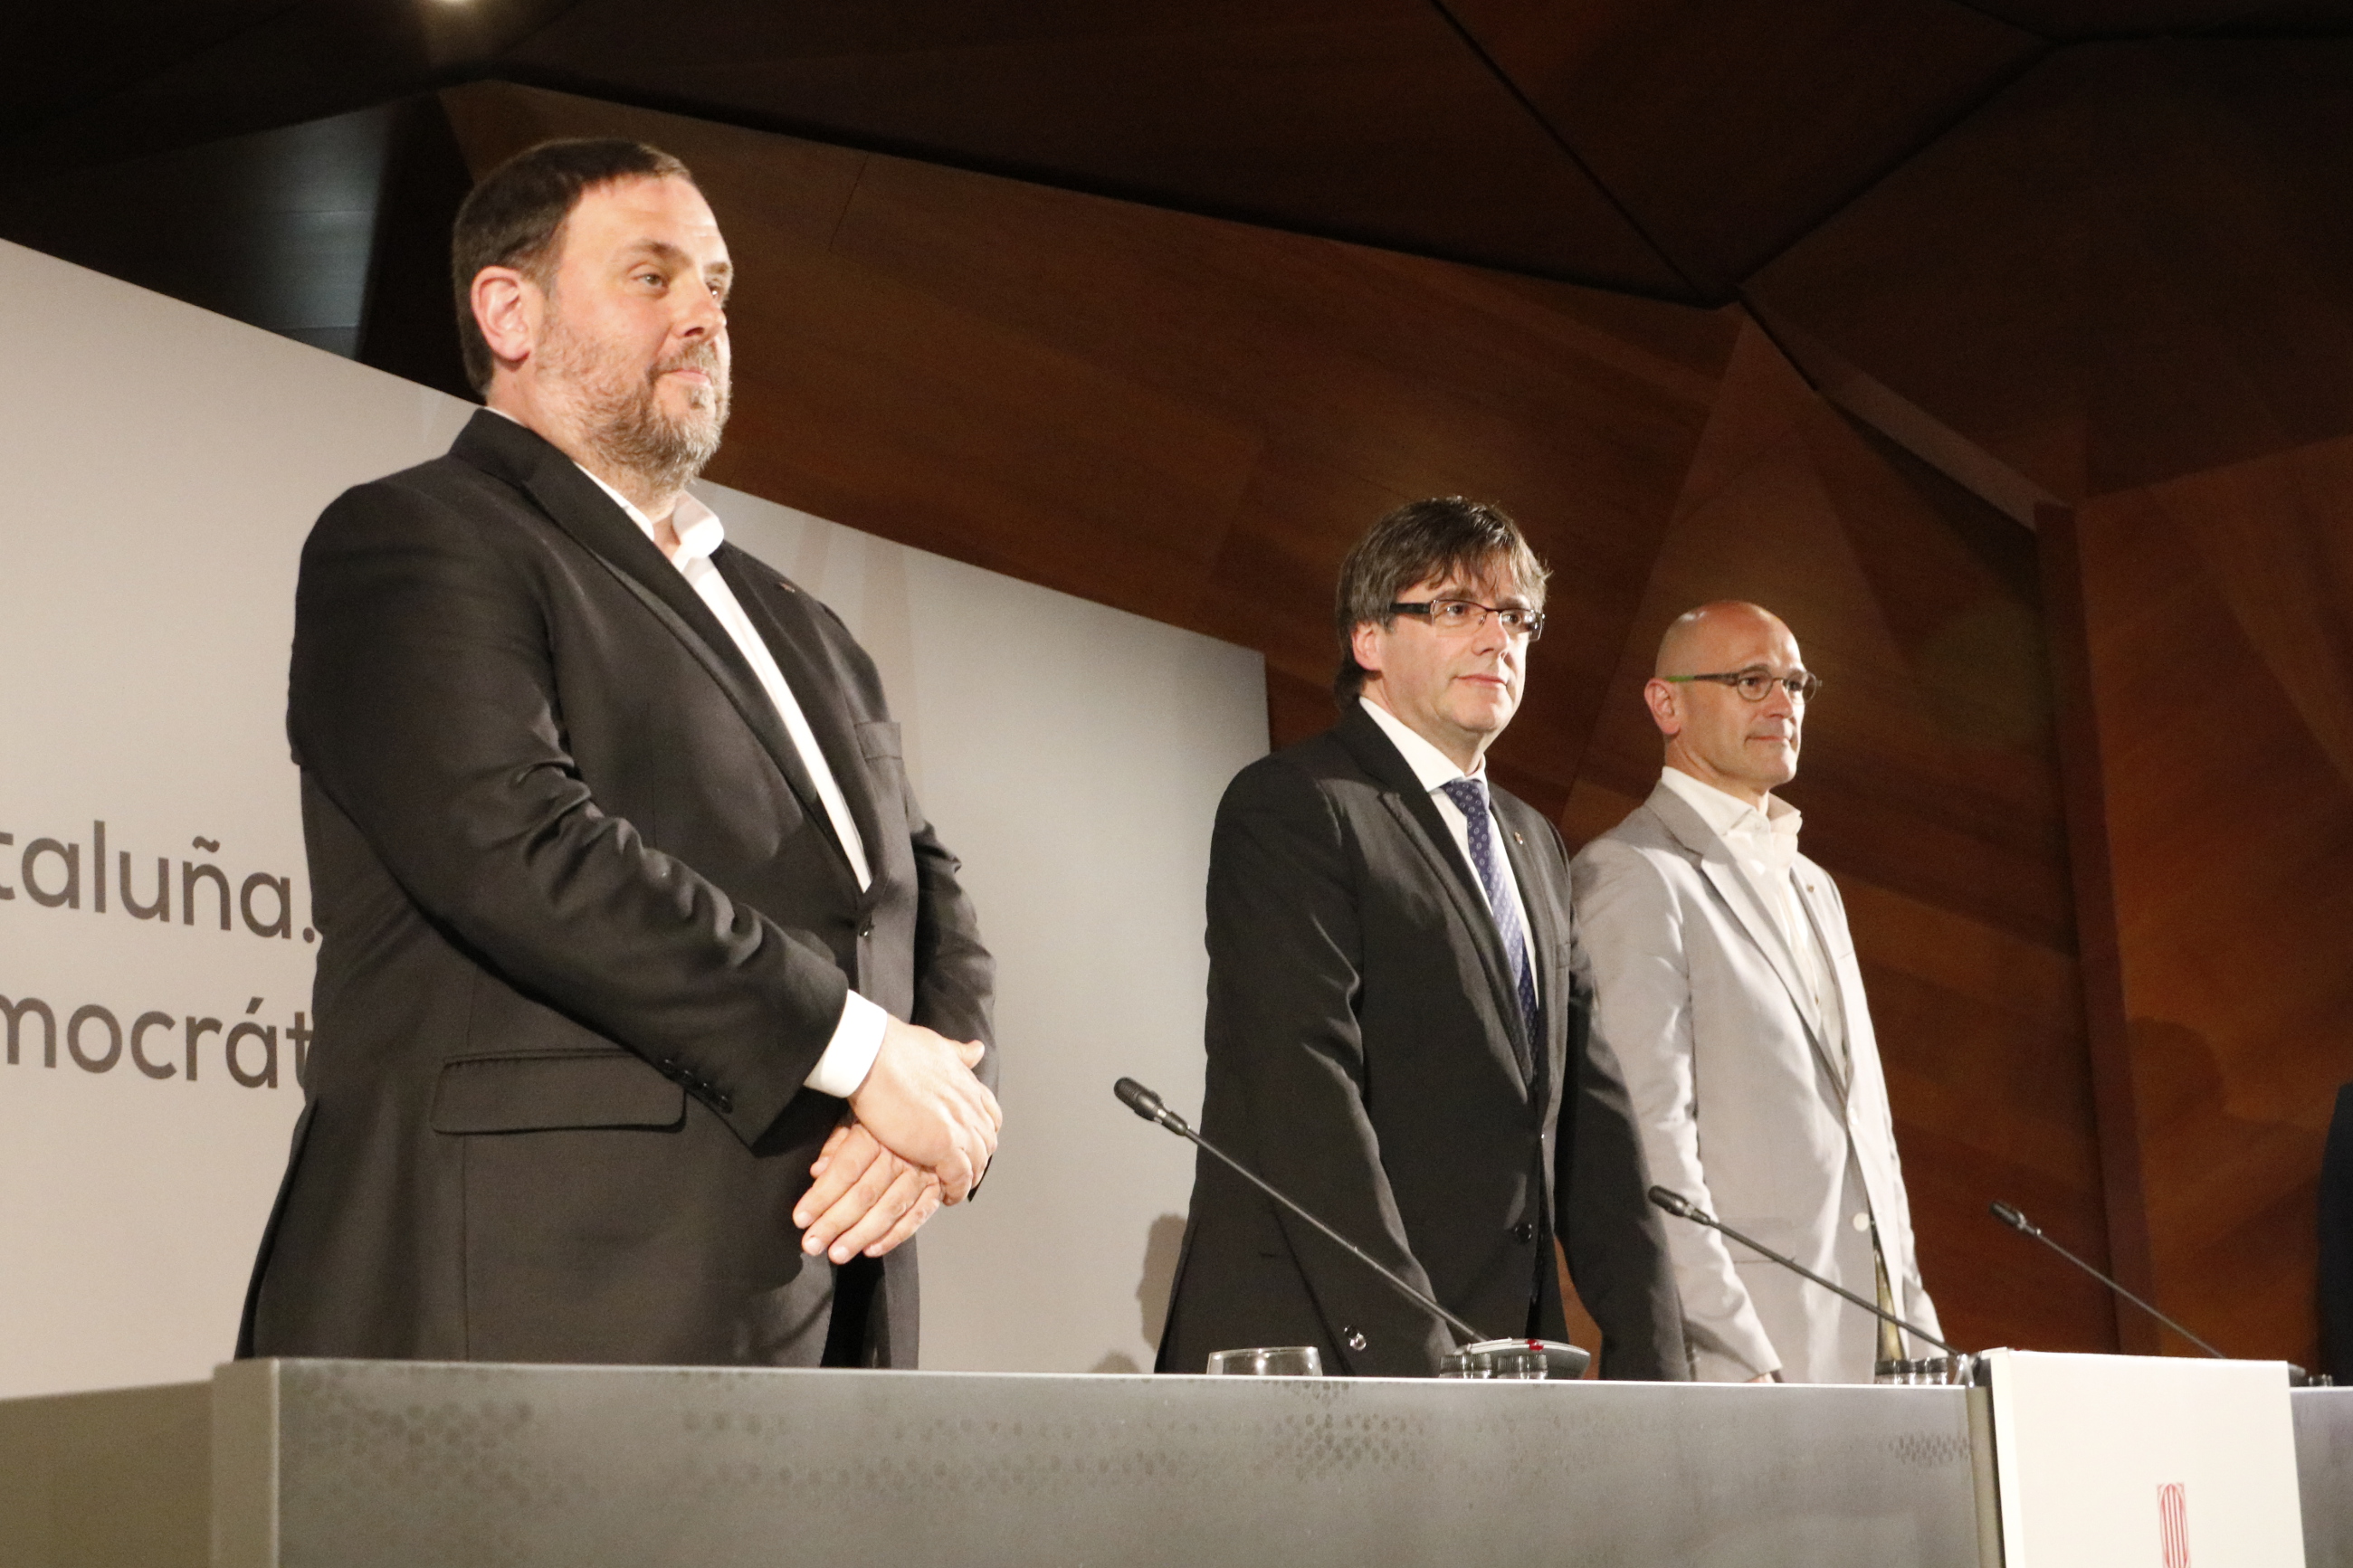 Catalan VP, Oriol Junqueras, Catalan President, Carles Puigdemont and Catalan Minister for Foreign Affairs, Raül Romeva (by 